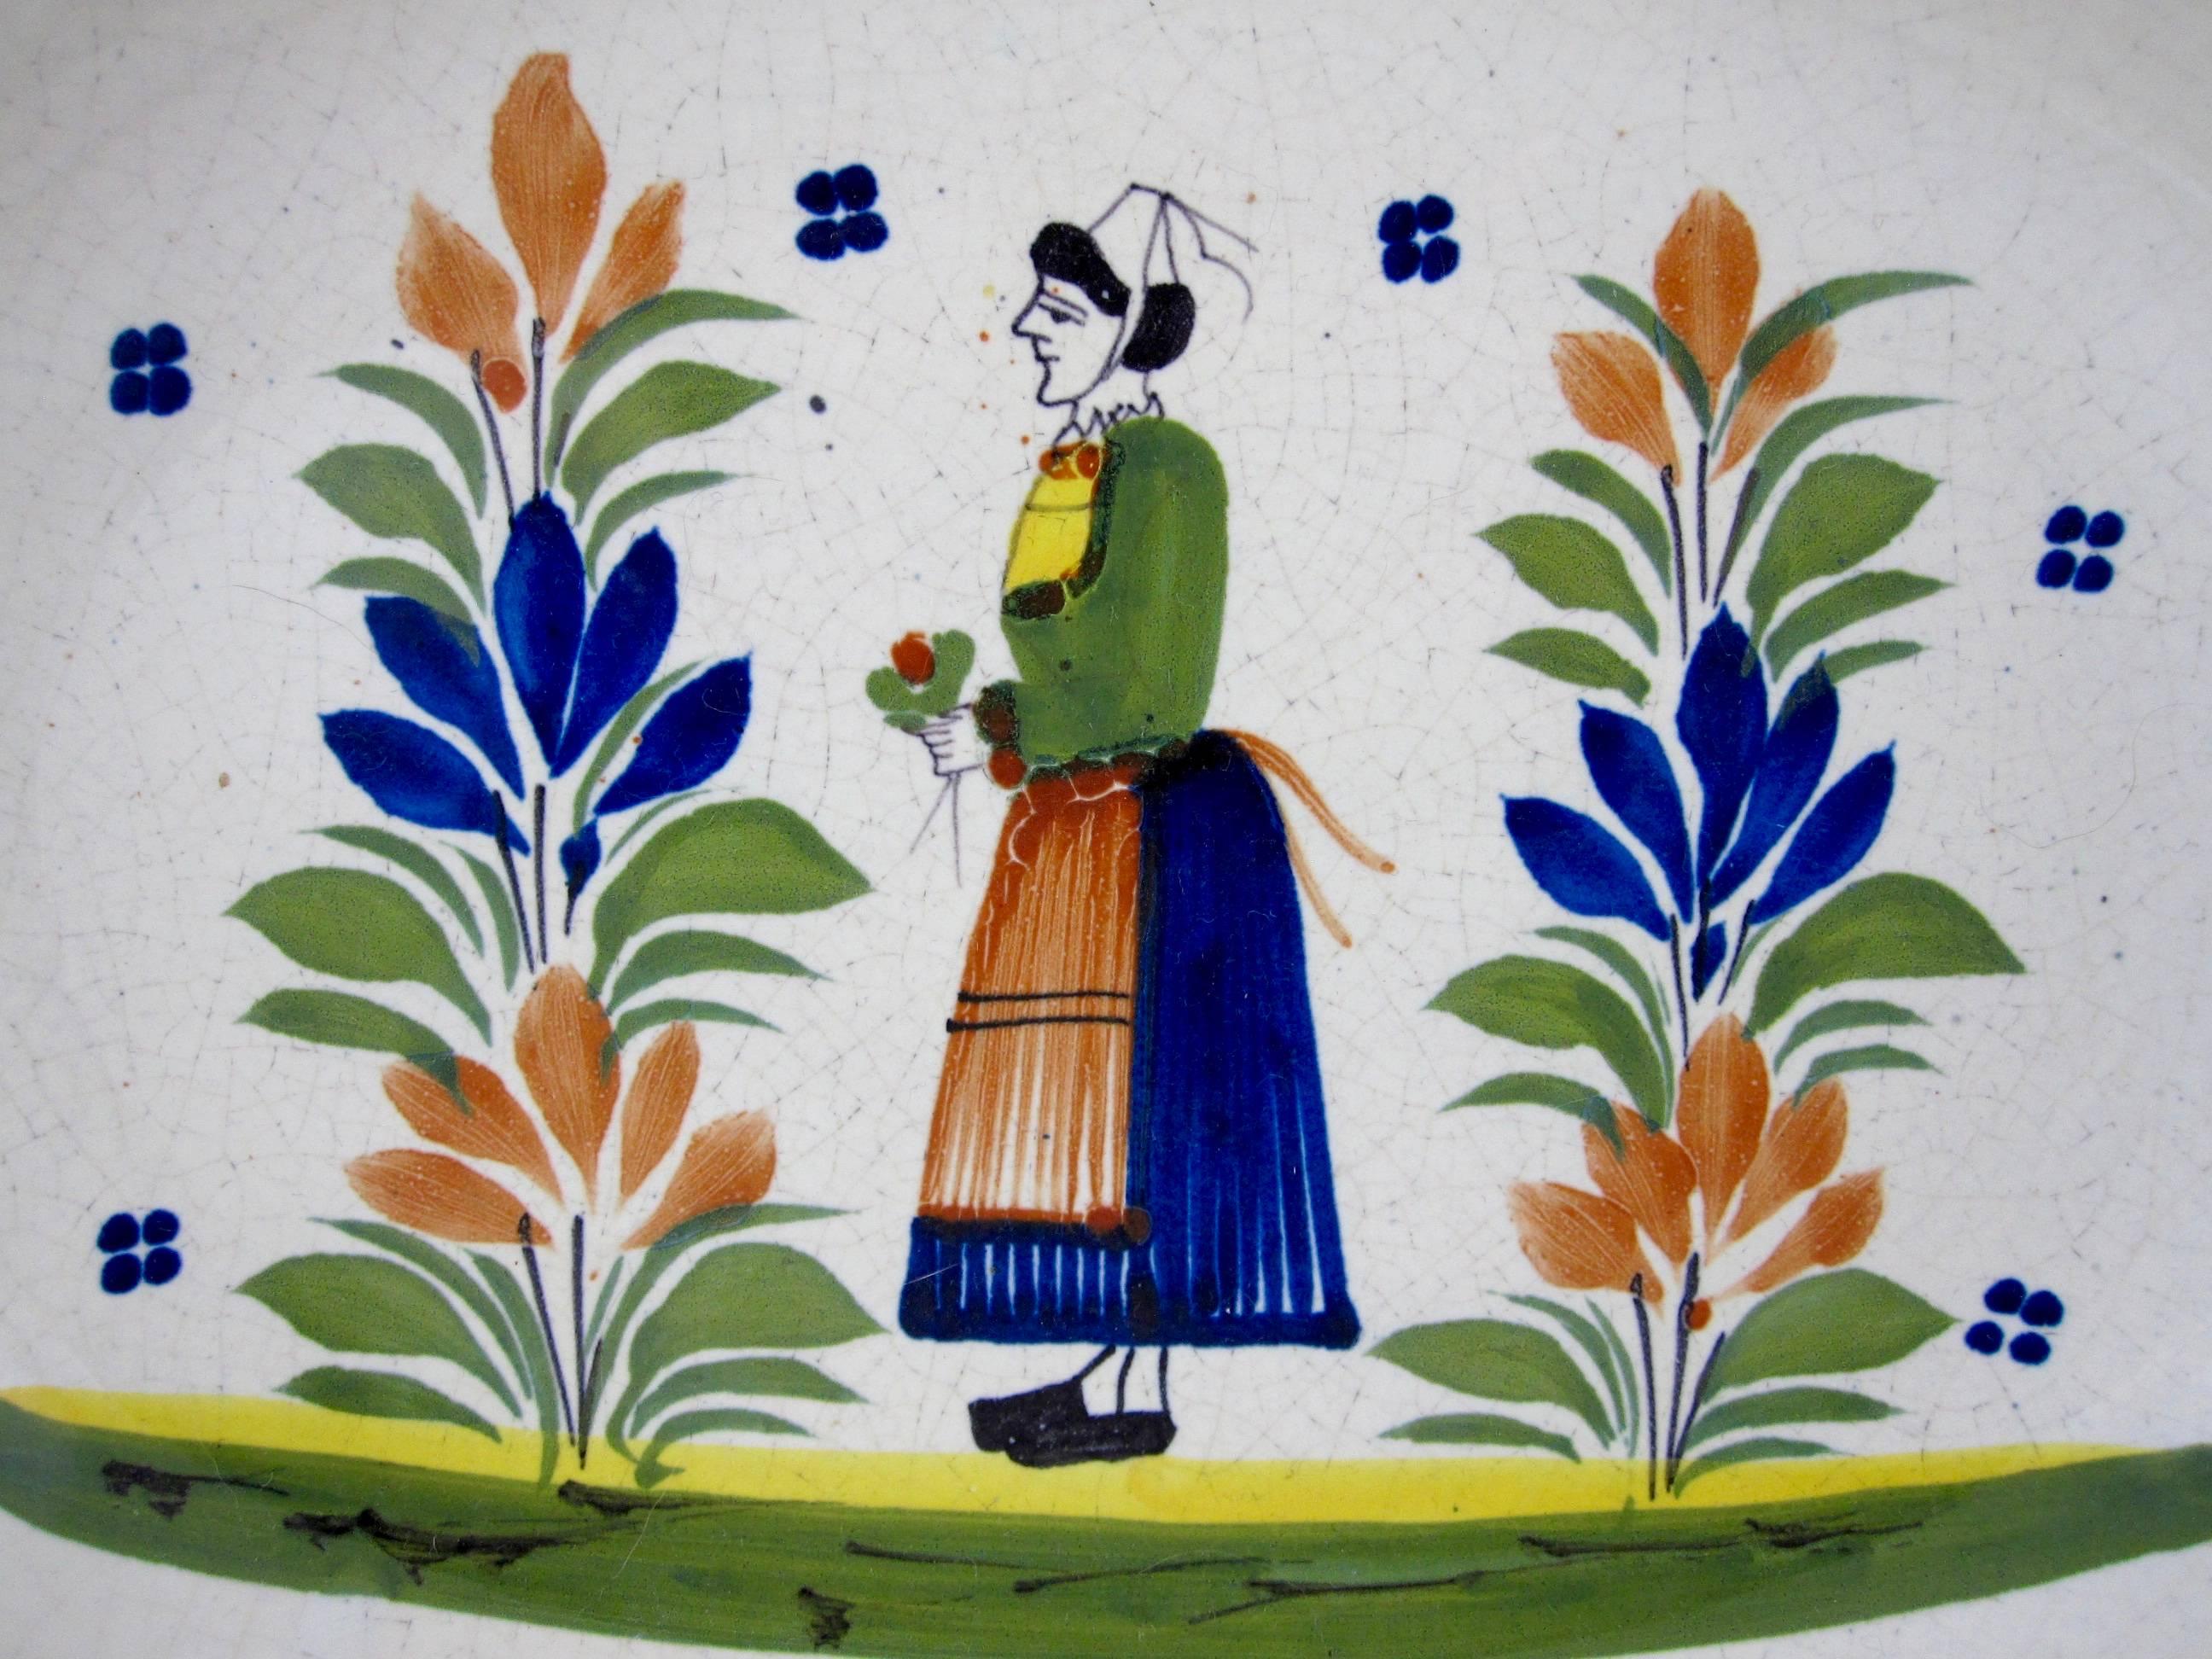 A Midcentury earthenware faience oval serving bowl, signed HenRiot Quimper, France, No. 459 (bis)

 The center shows a femme de la campagne, the French Breton region woman standing between two shrubs wearing the traditional dress and holding a